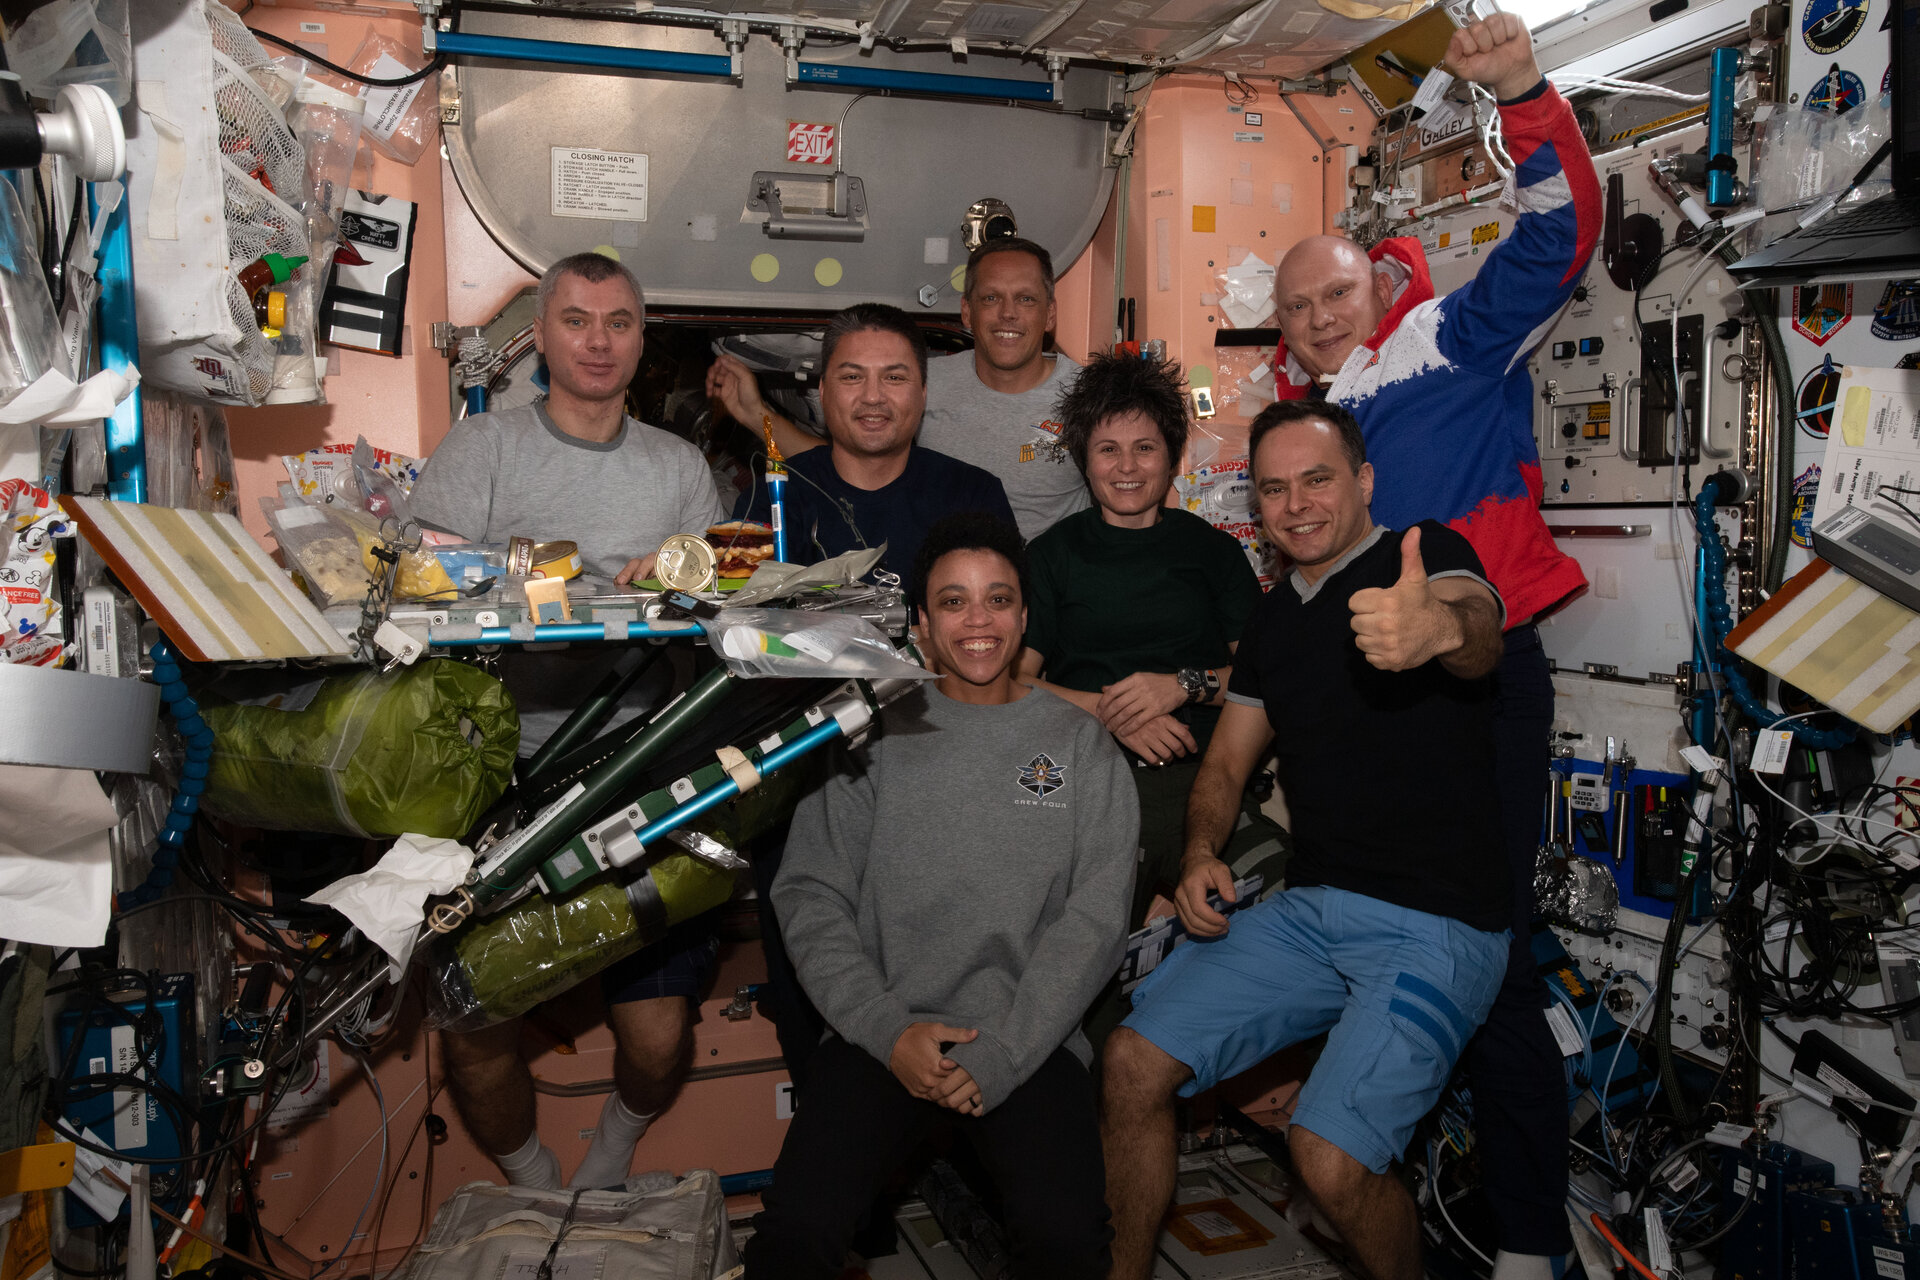 Expedition 67 poses at dinner